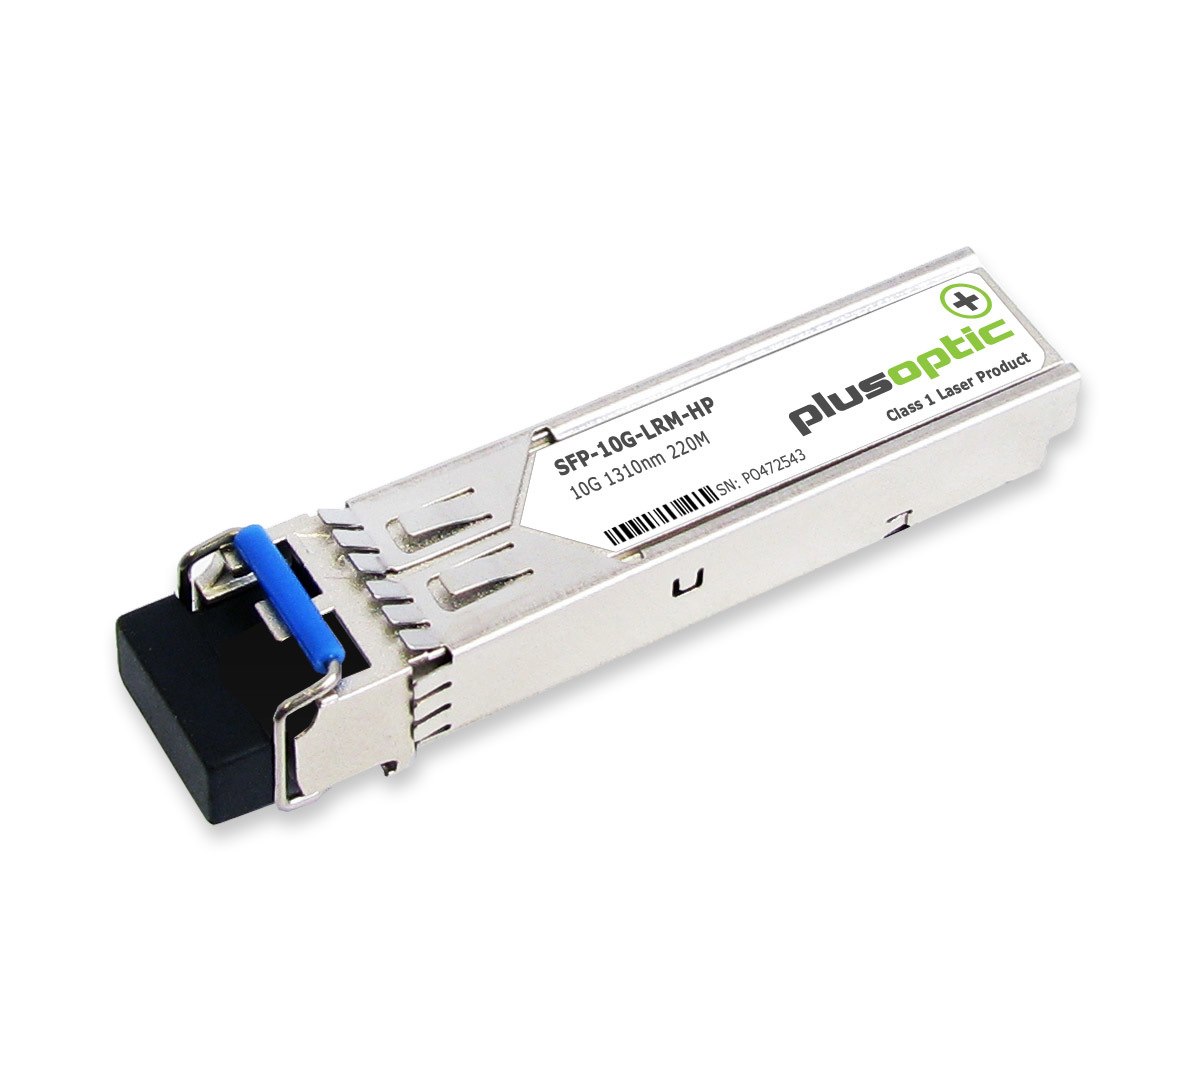 PlusOptic HP / Aruba Compatible (J9152a) 10G, SFP+, 1310NM, 220M Transceiver, LC Connector For MMF With Dom | PlusOptic SFP-10G-LRM-HP